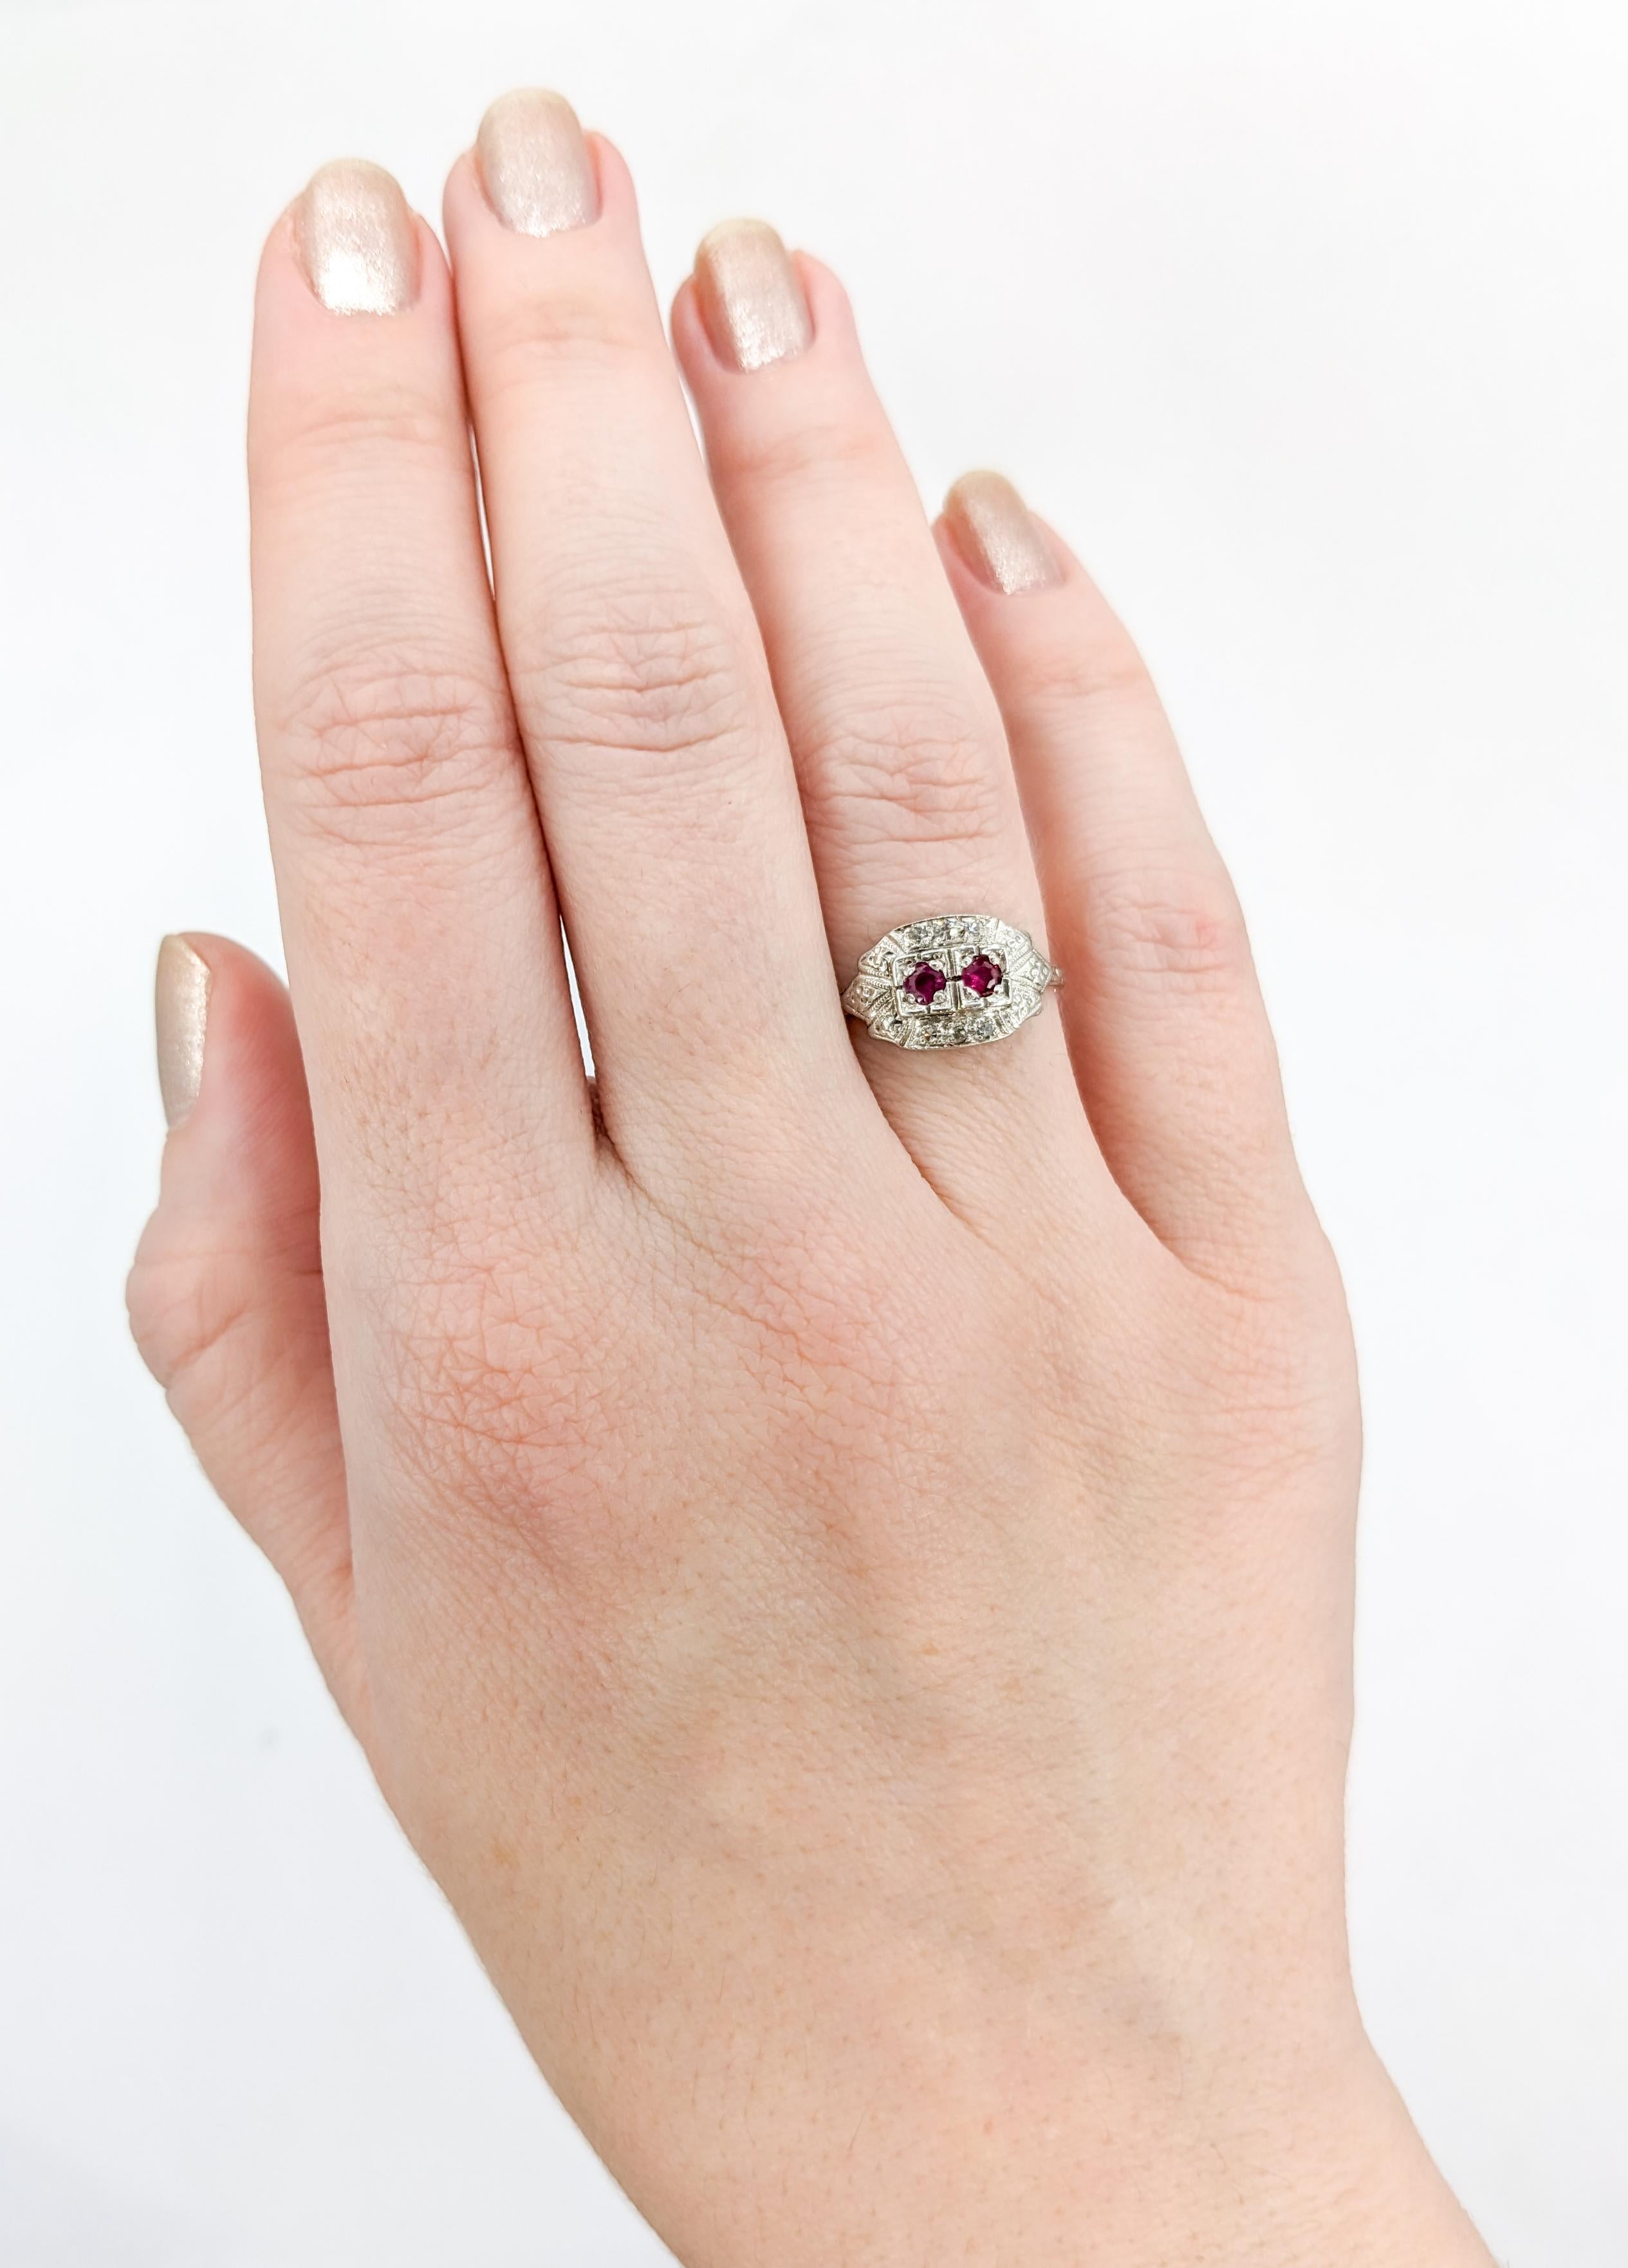 Dreamy Antique Ruby & Diamond Ring in Platinum

Discover the allure of bygone eras with our enchanting Antique Ruby Ring. Beautifully fashioned in platinum, This ring boasts a graceful pair of Rubies totaling .20ctw. In addition to the vibrant